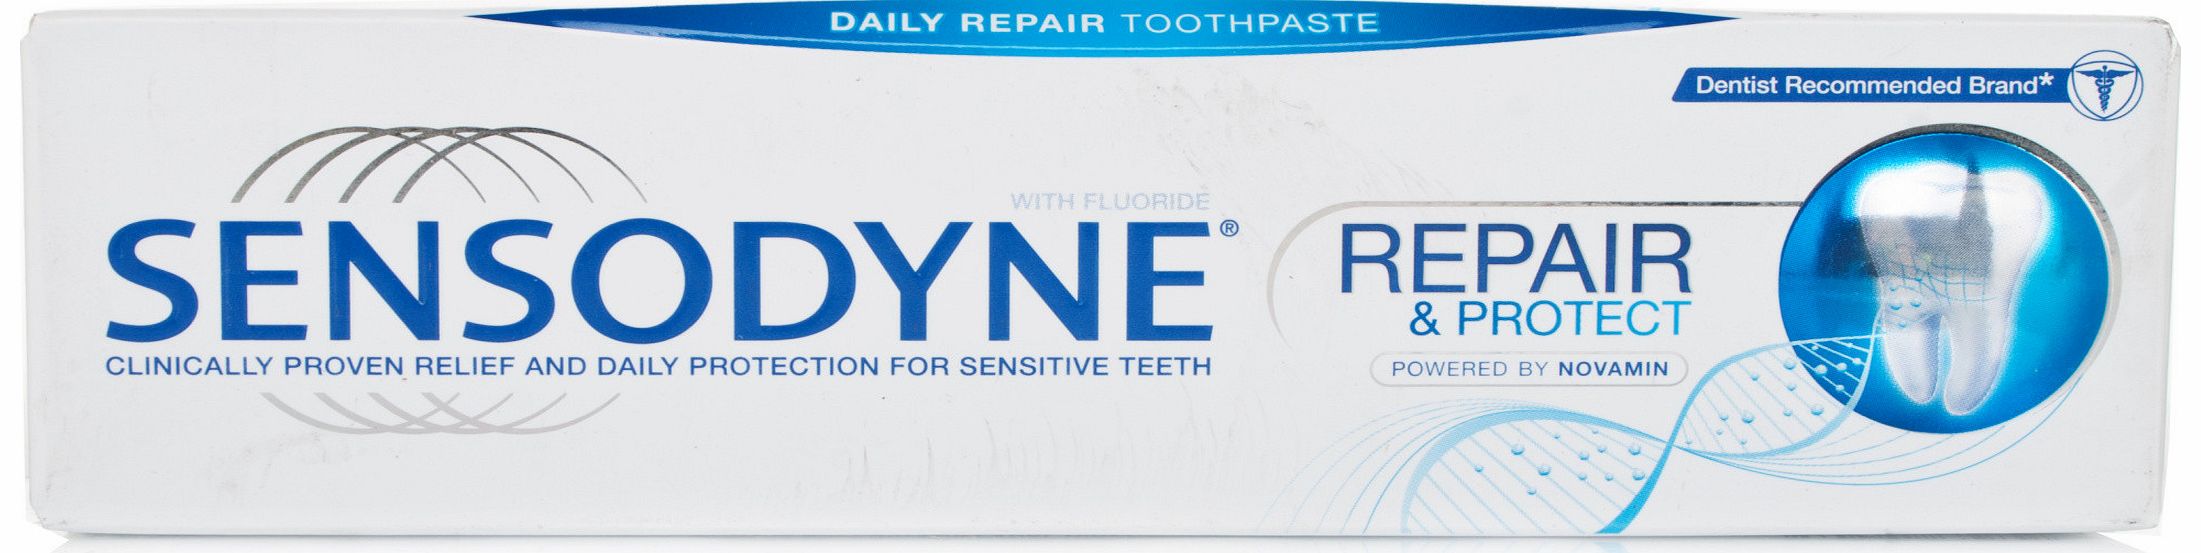 Repair & Protect Toothpaste